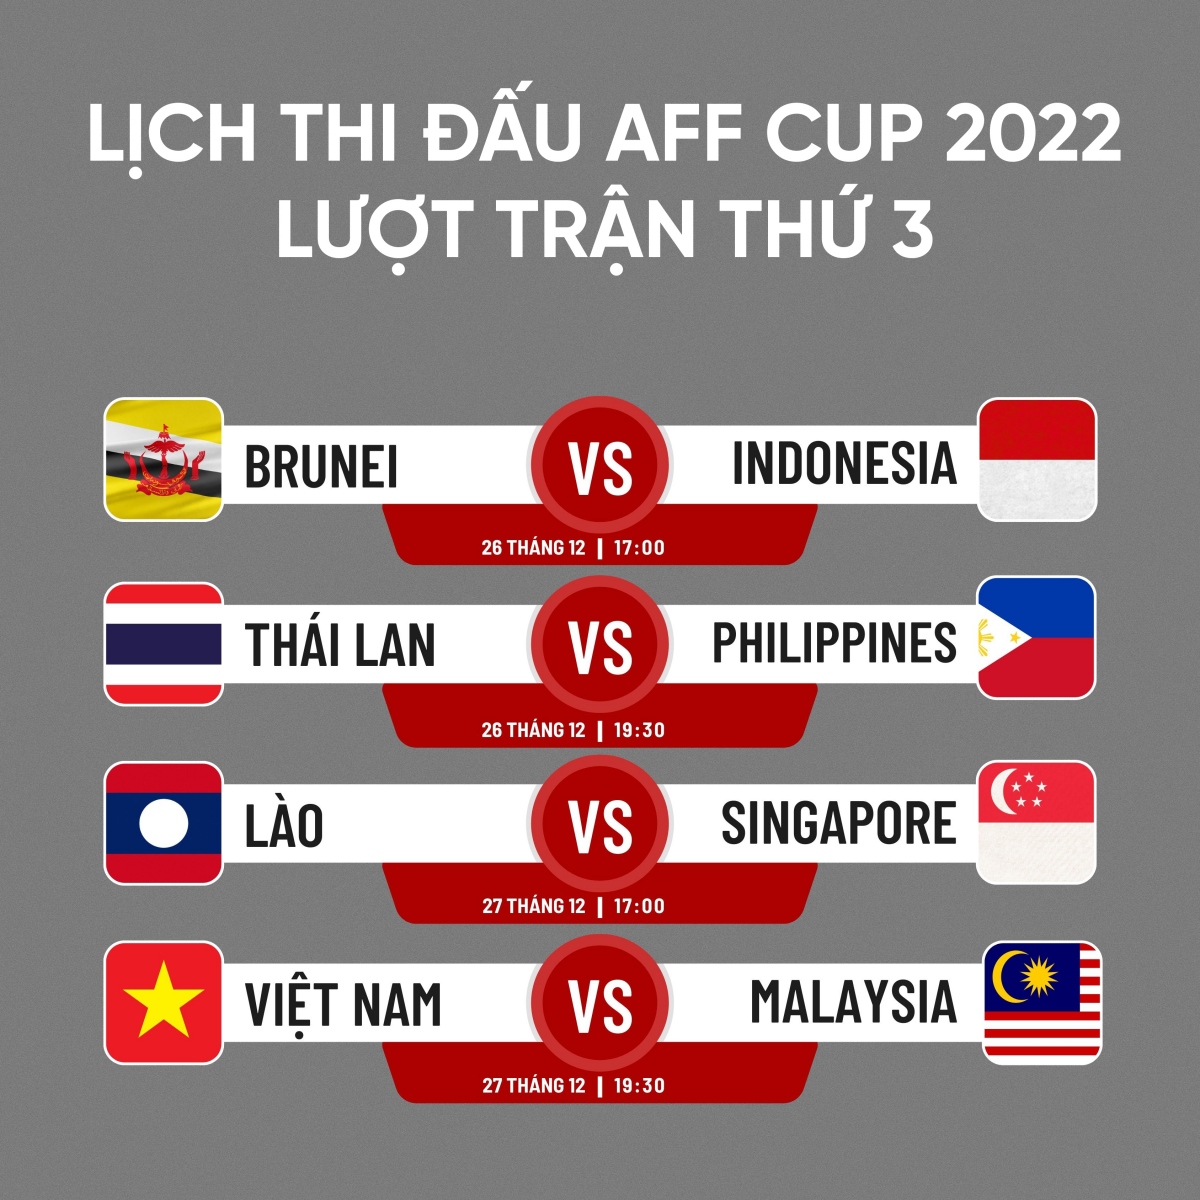 lich thi dau luot tran 3 aff cup 2022 Dt viet nam so tai Dt malaysia hinh anh 1